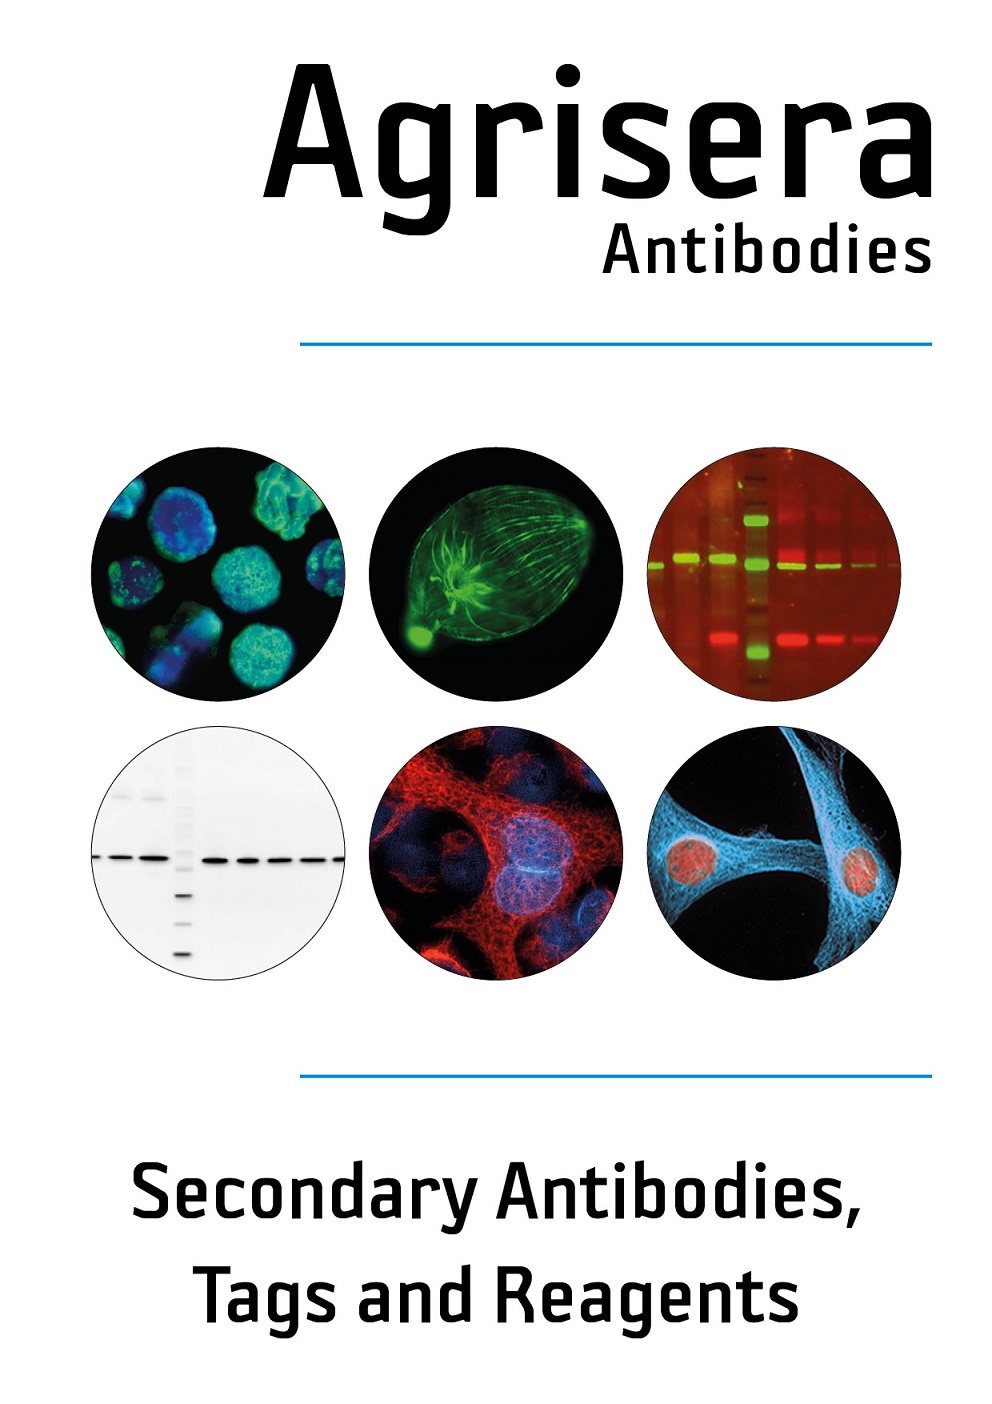 Agrisera secondary antibodies, tags and reagents